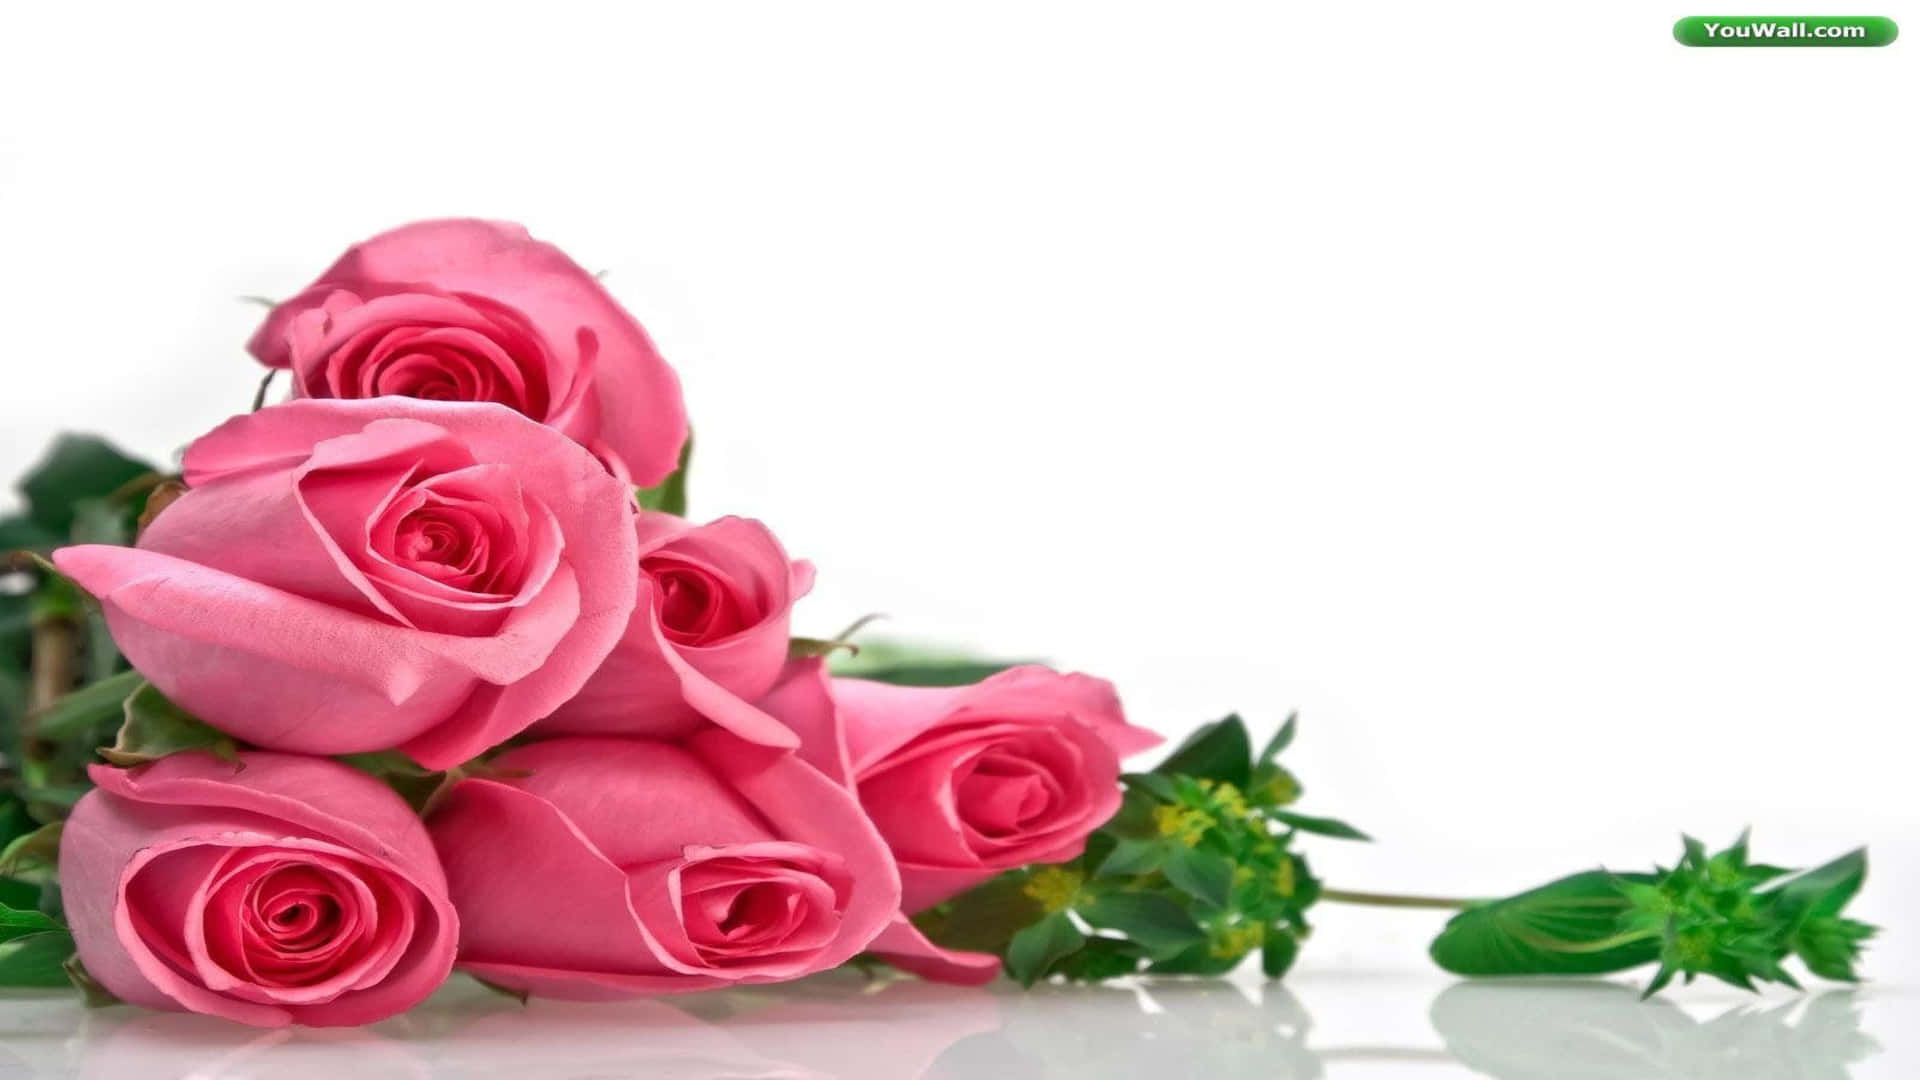 1080p Lovely Pink Roses Background